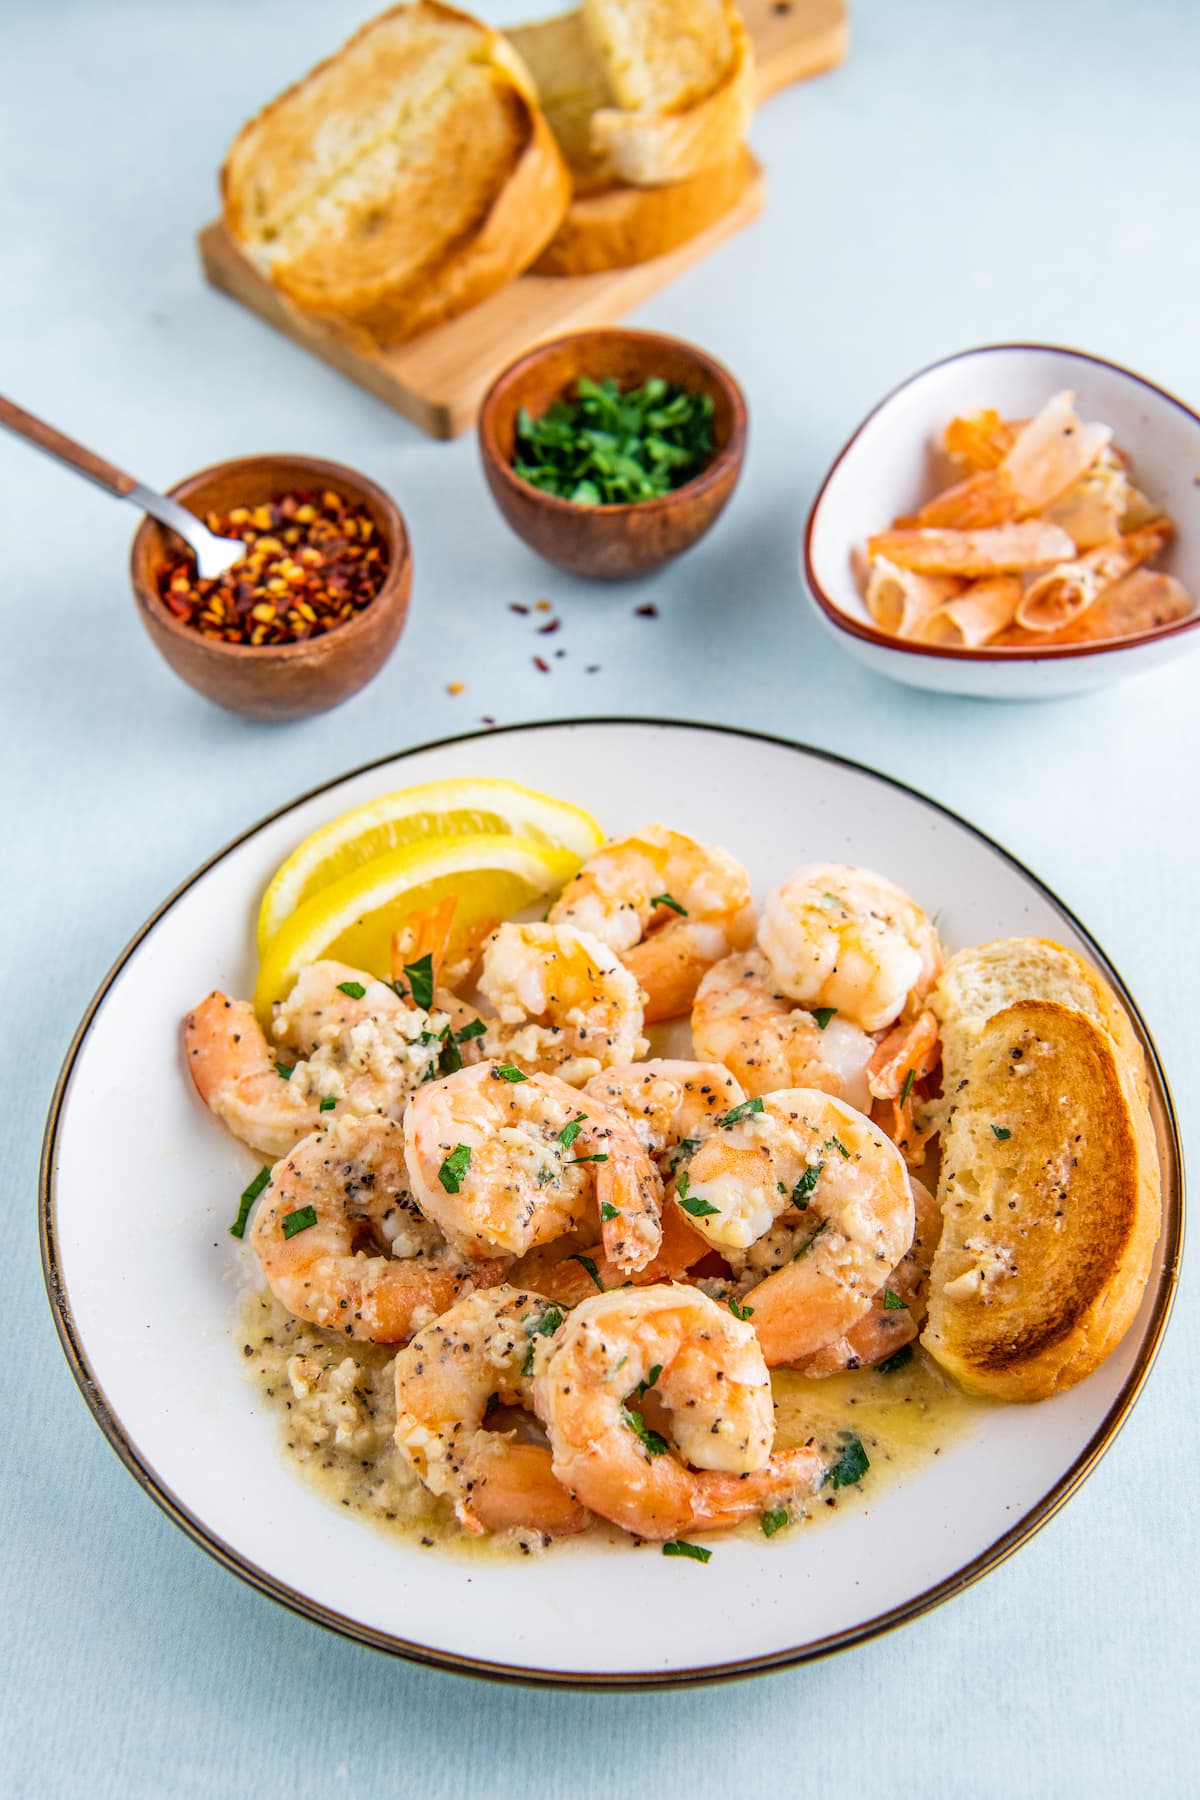 A plate of sautéed shrimp in a garlic butter sauce with garlic bread.